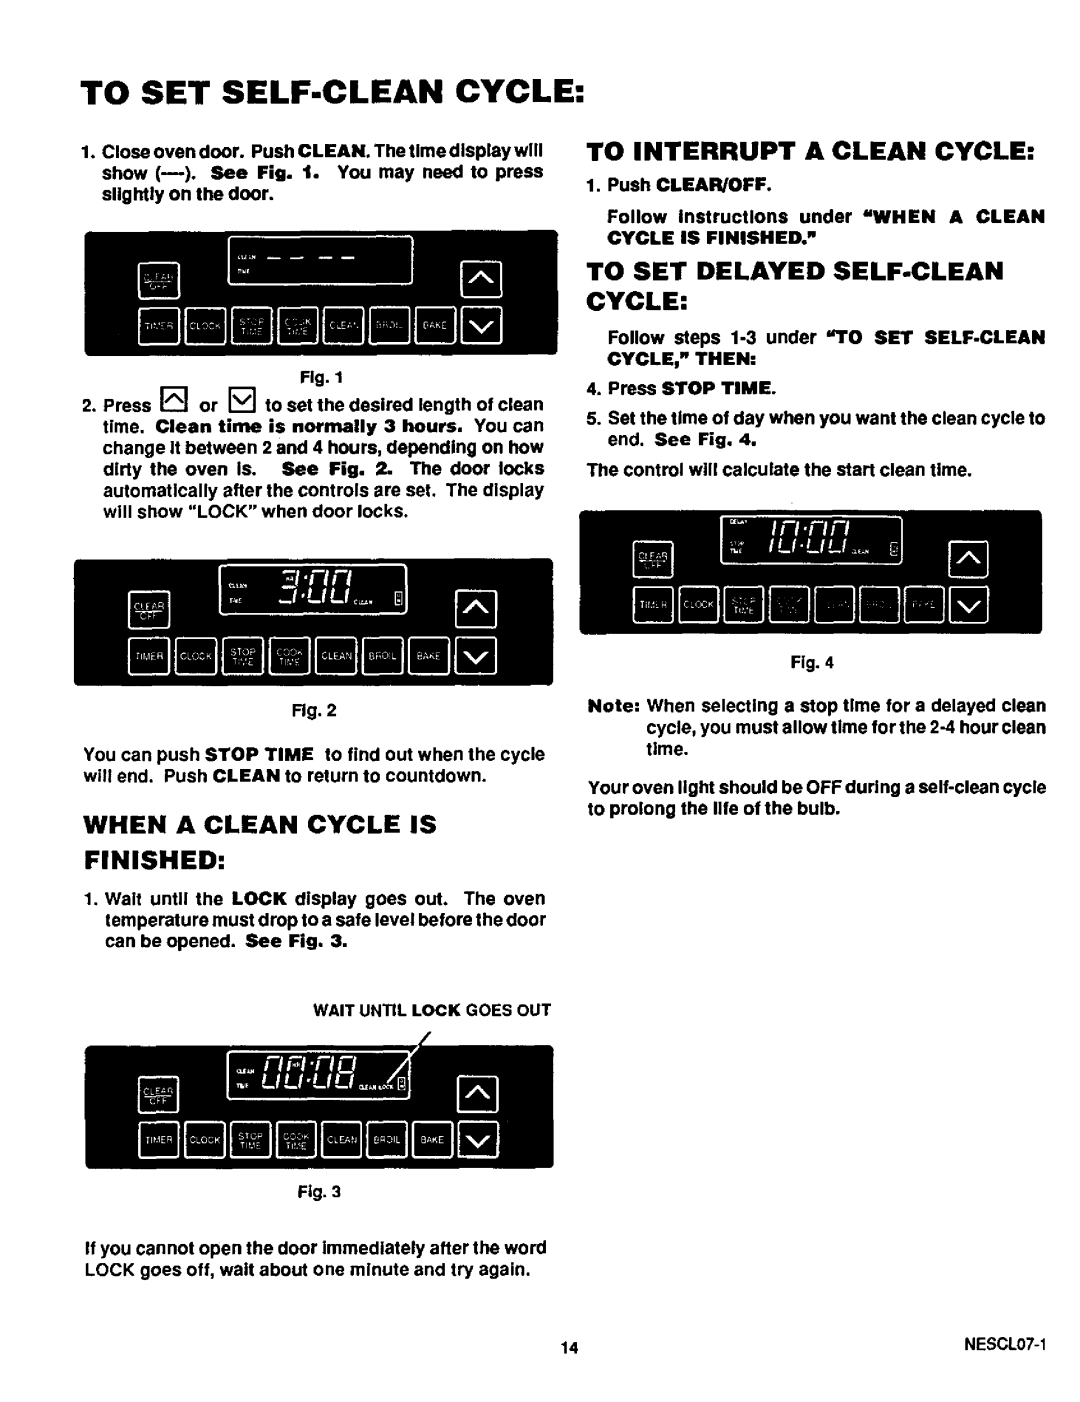 Sears 46525, 46520, 46521 warranty To Set Self-Cleancycle, To Interrupt A Clean Cycle, When A Clean Cycle Is Finished 